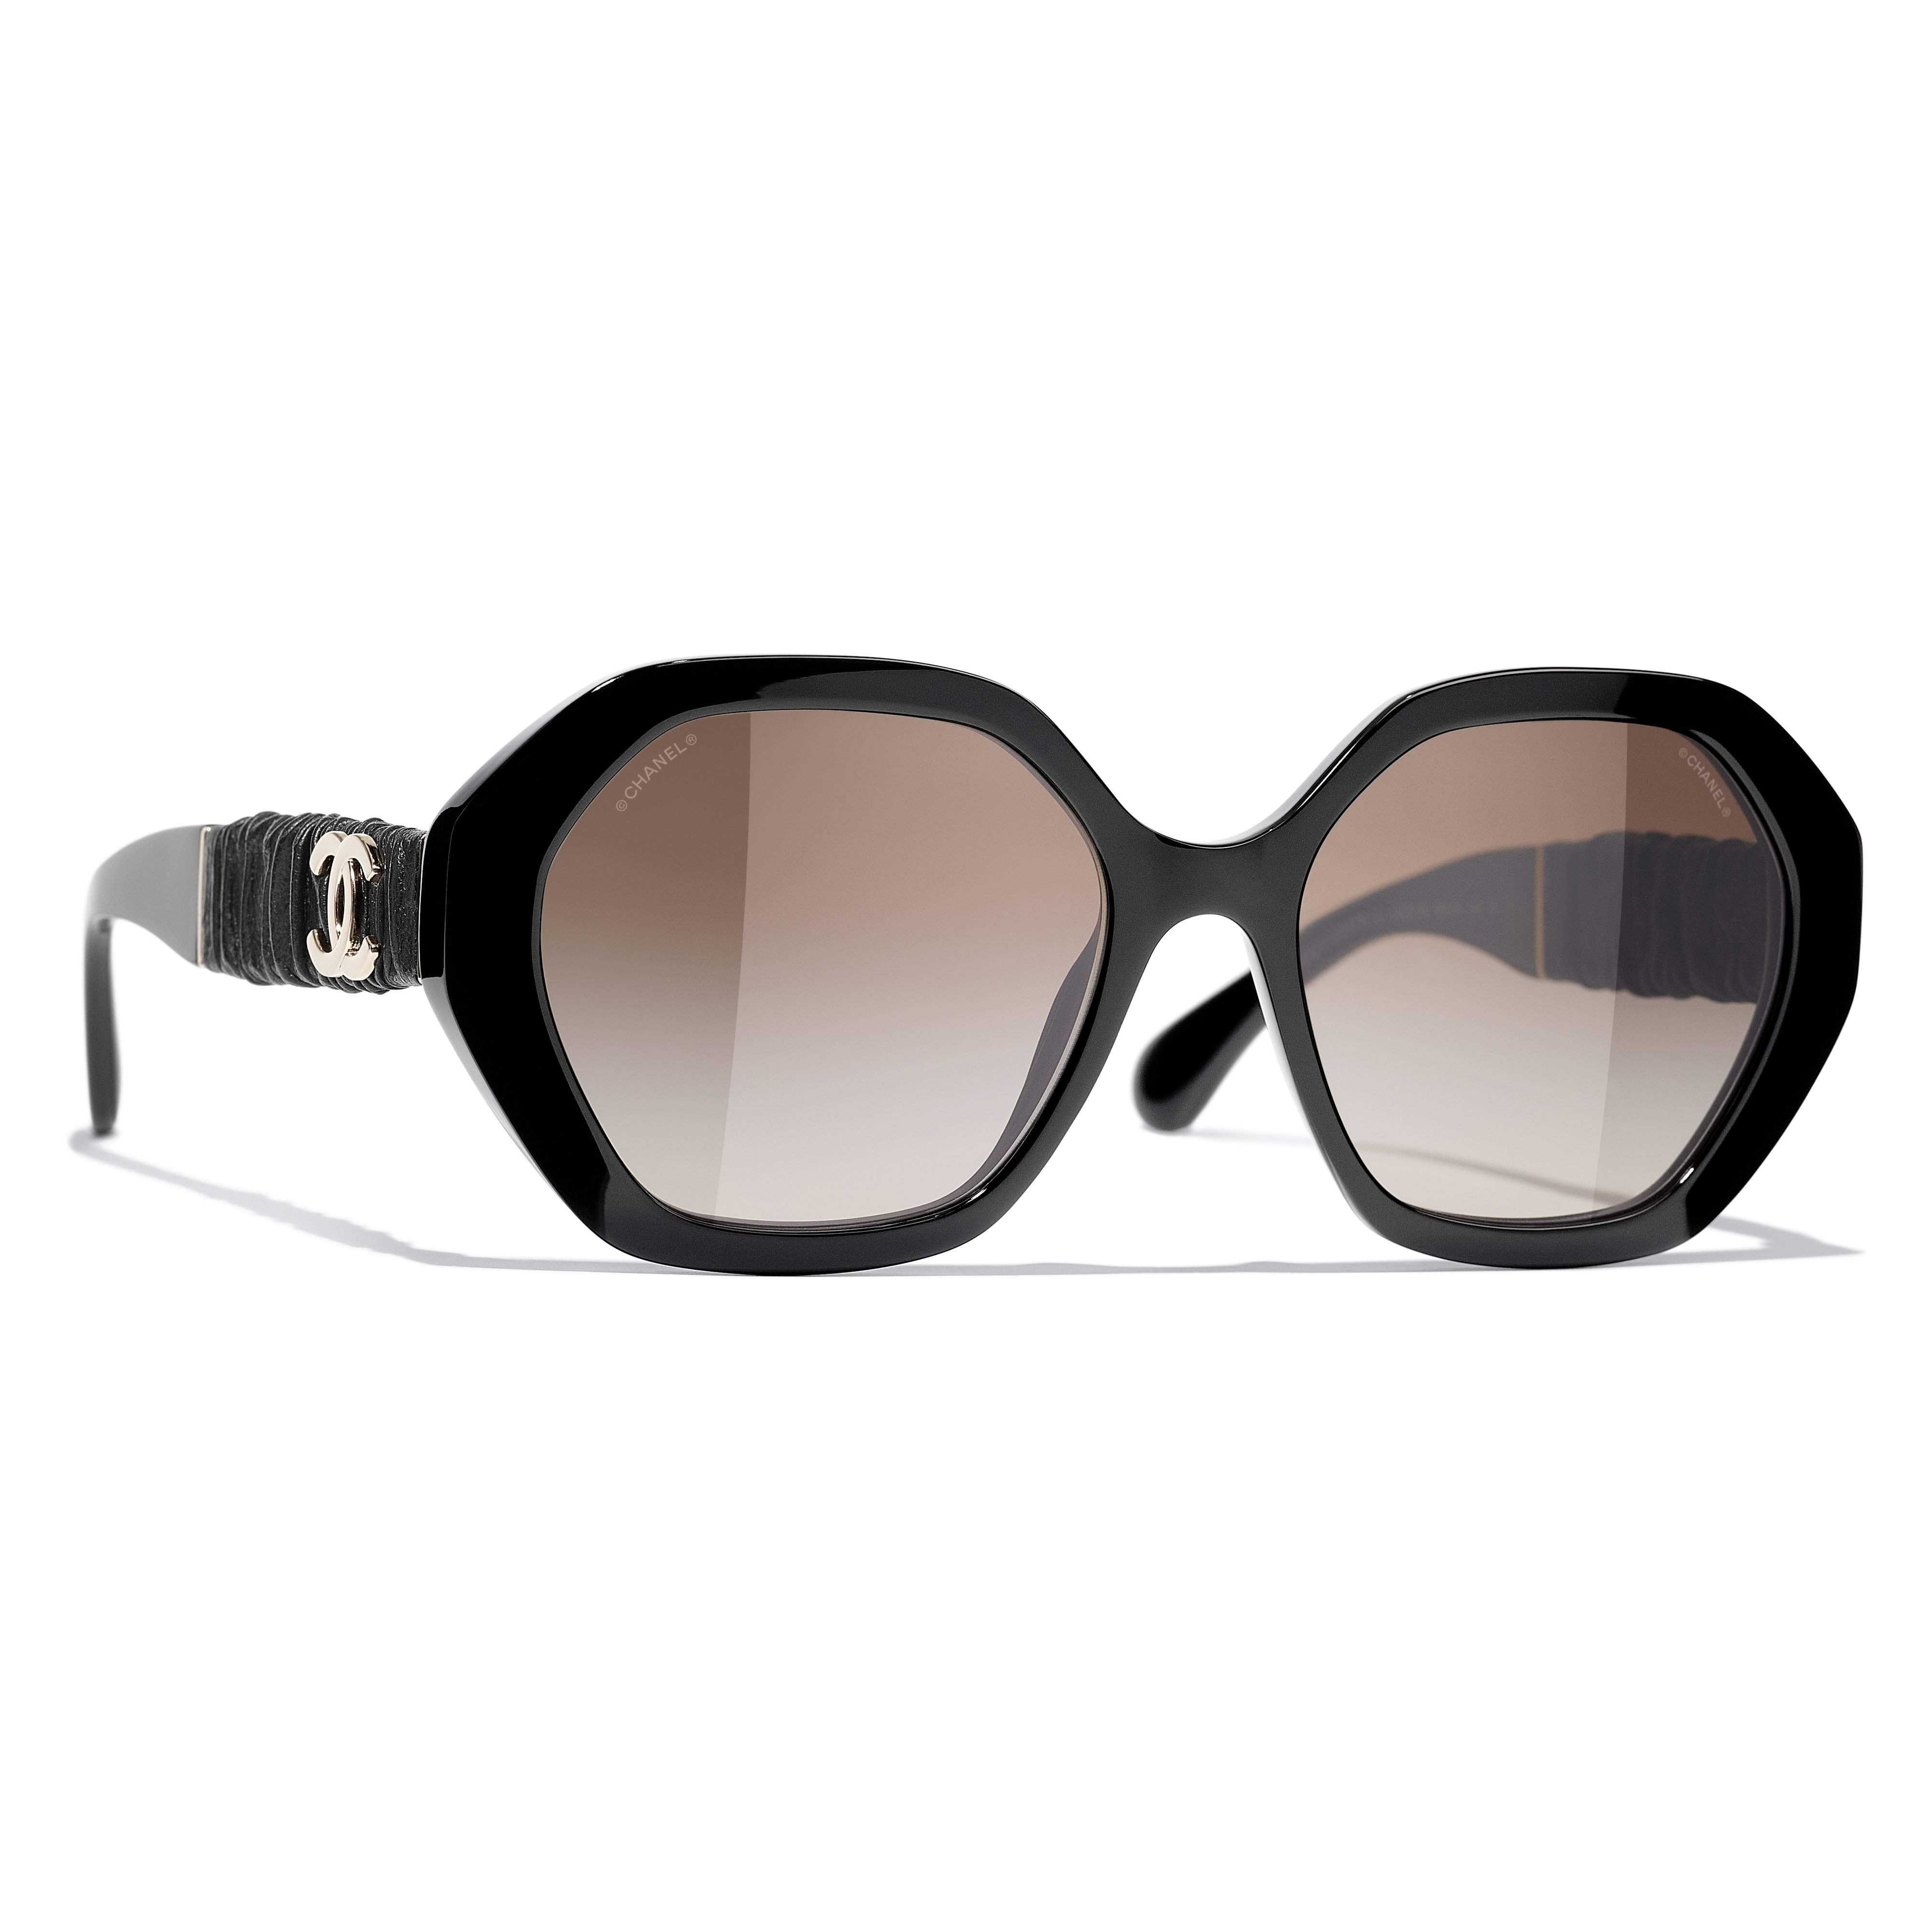 Sunglasses Chanel CH5475Q C622S5 55-18 Black in stock | Price 337,50 € |  Visiofactory